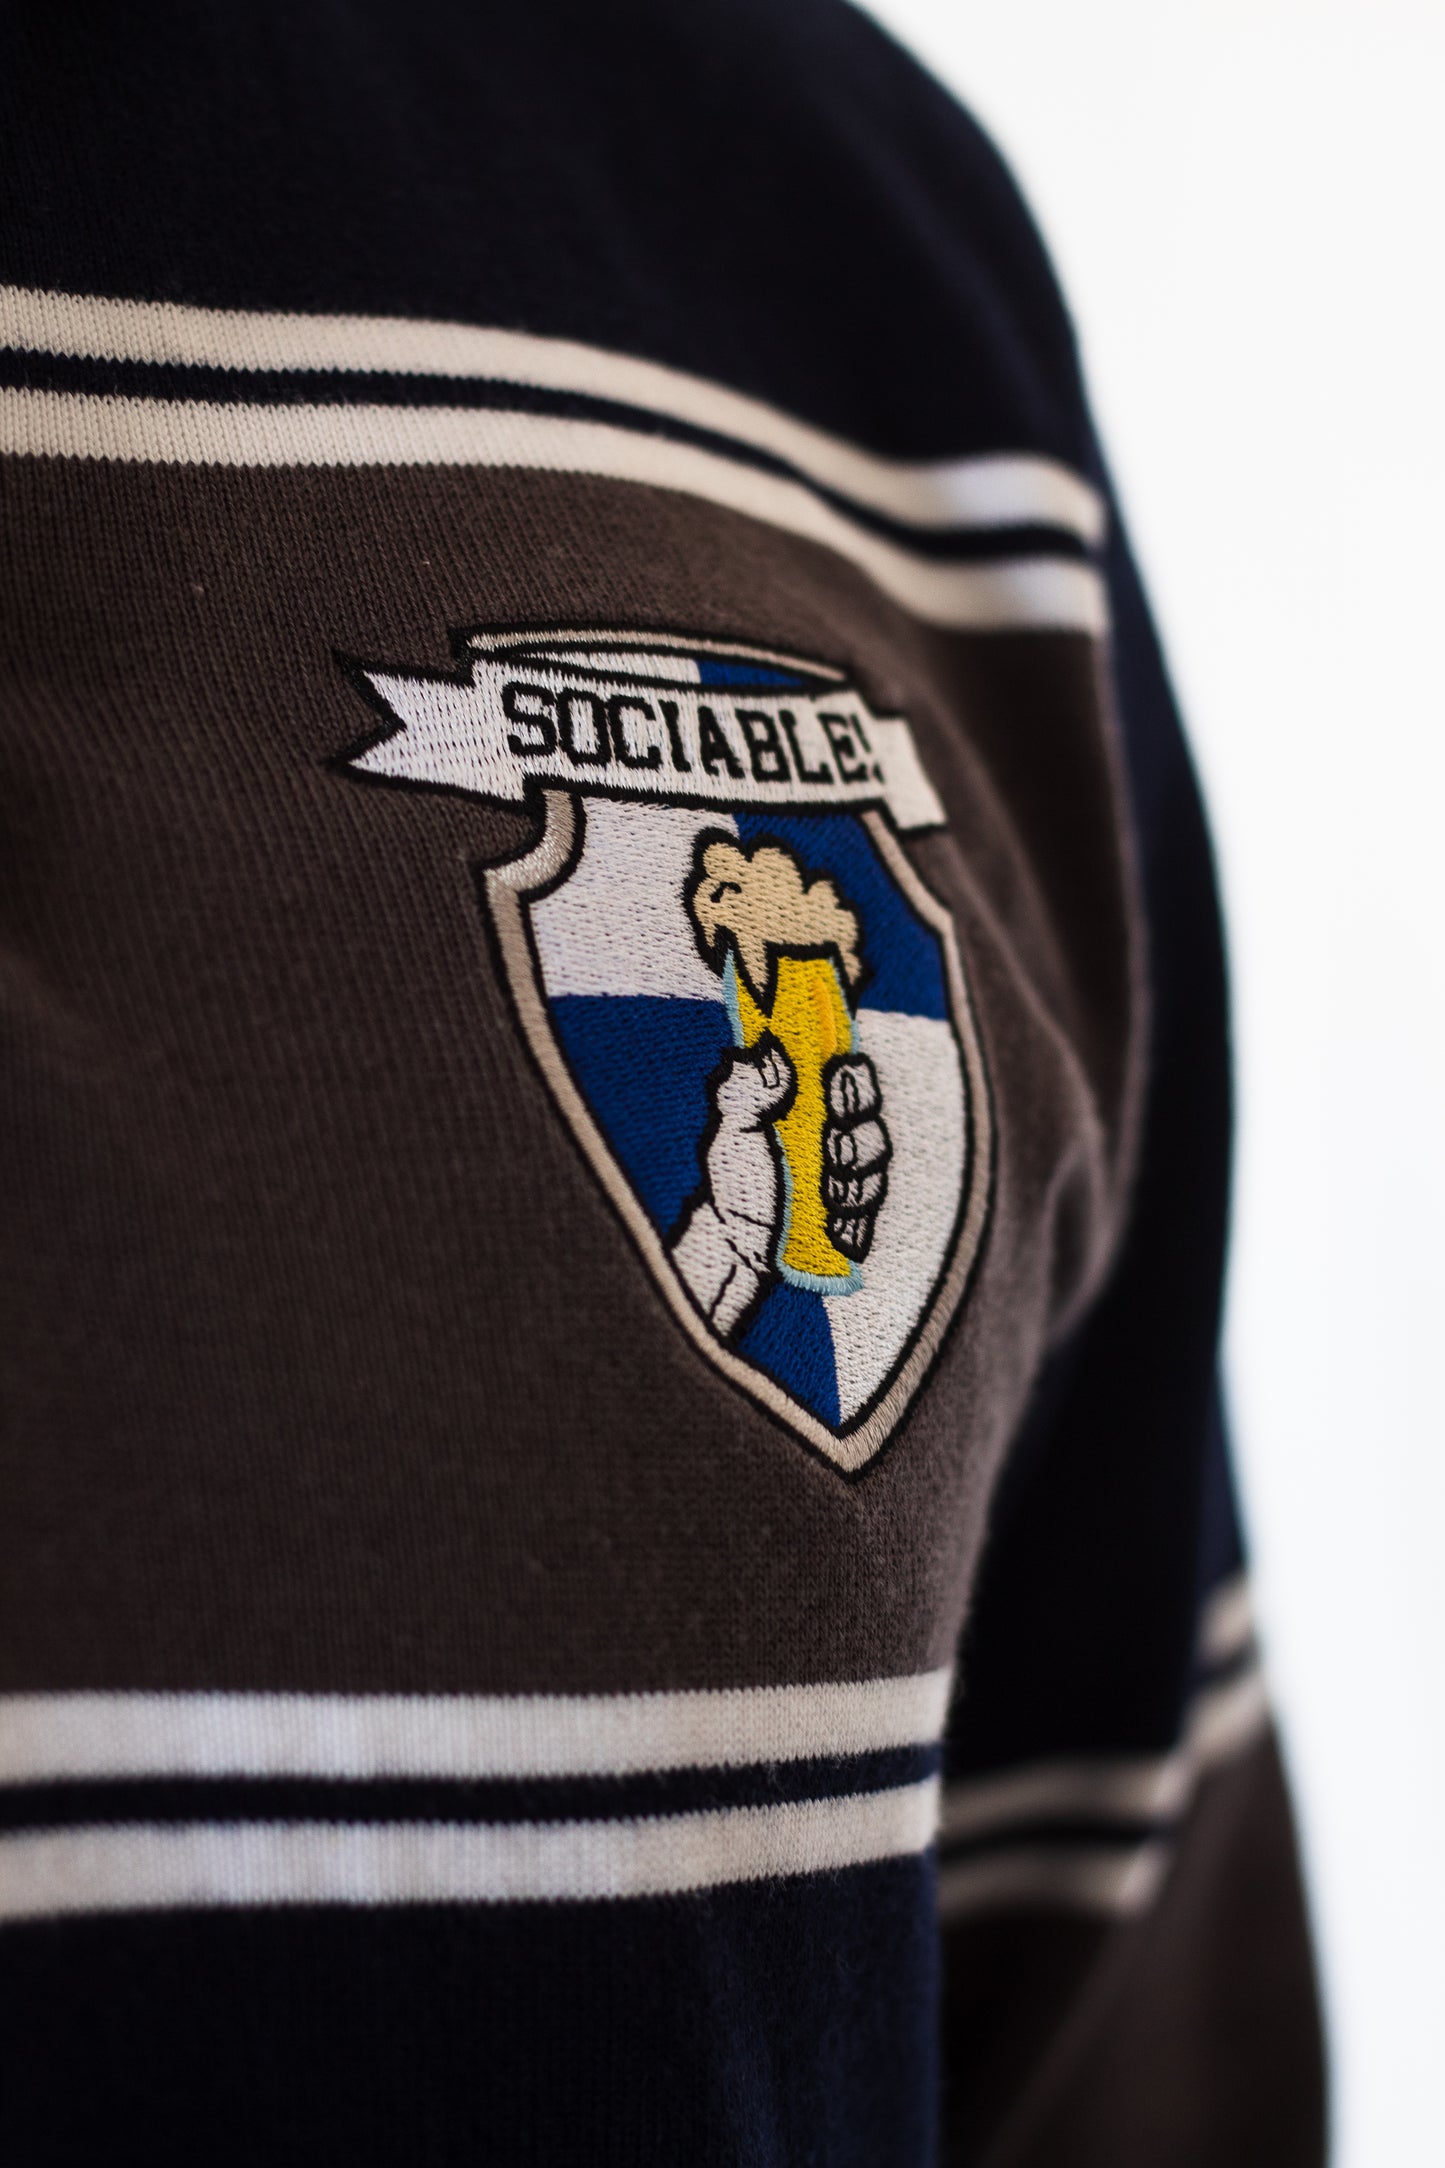 An embroidered sociable beer crest on a blue and grey rugby shirt